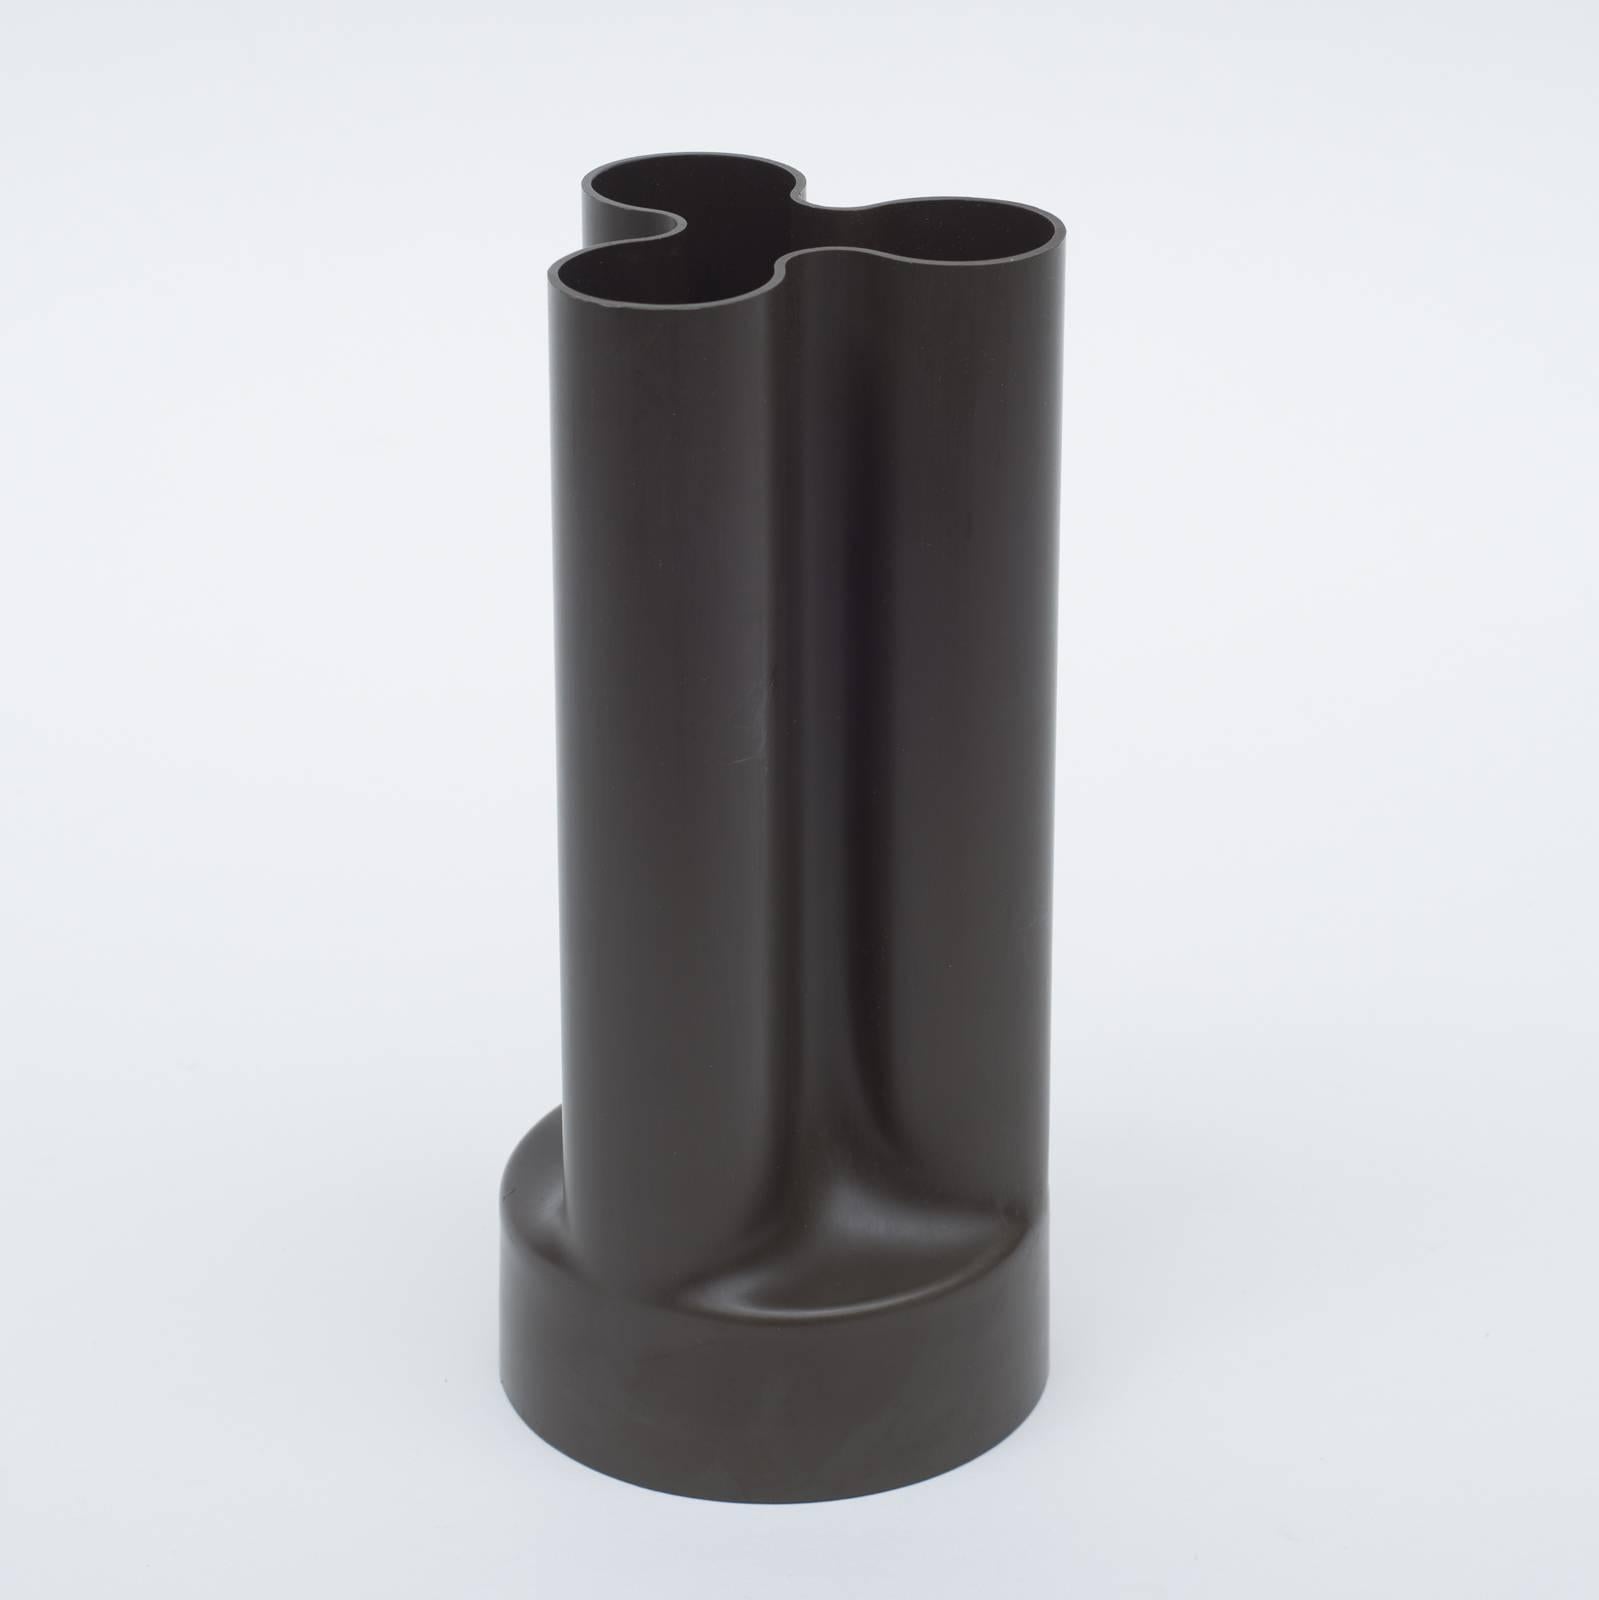 This is a vase from the Trifoglio series by Enzo Mari for Danese. Trifoglio is Italian for Shamrock or Clover.